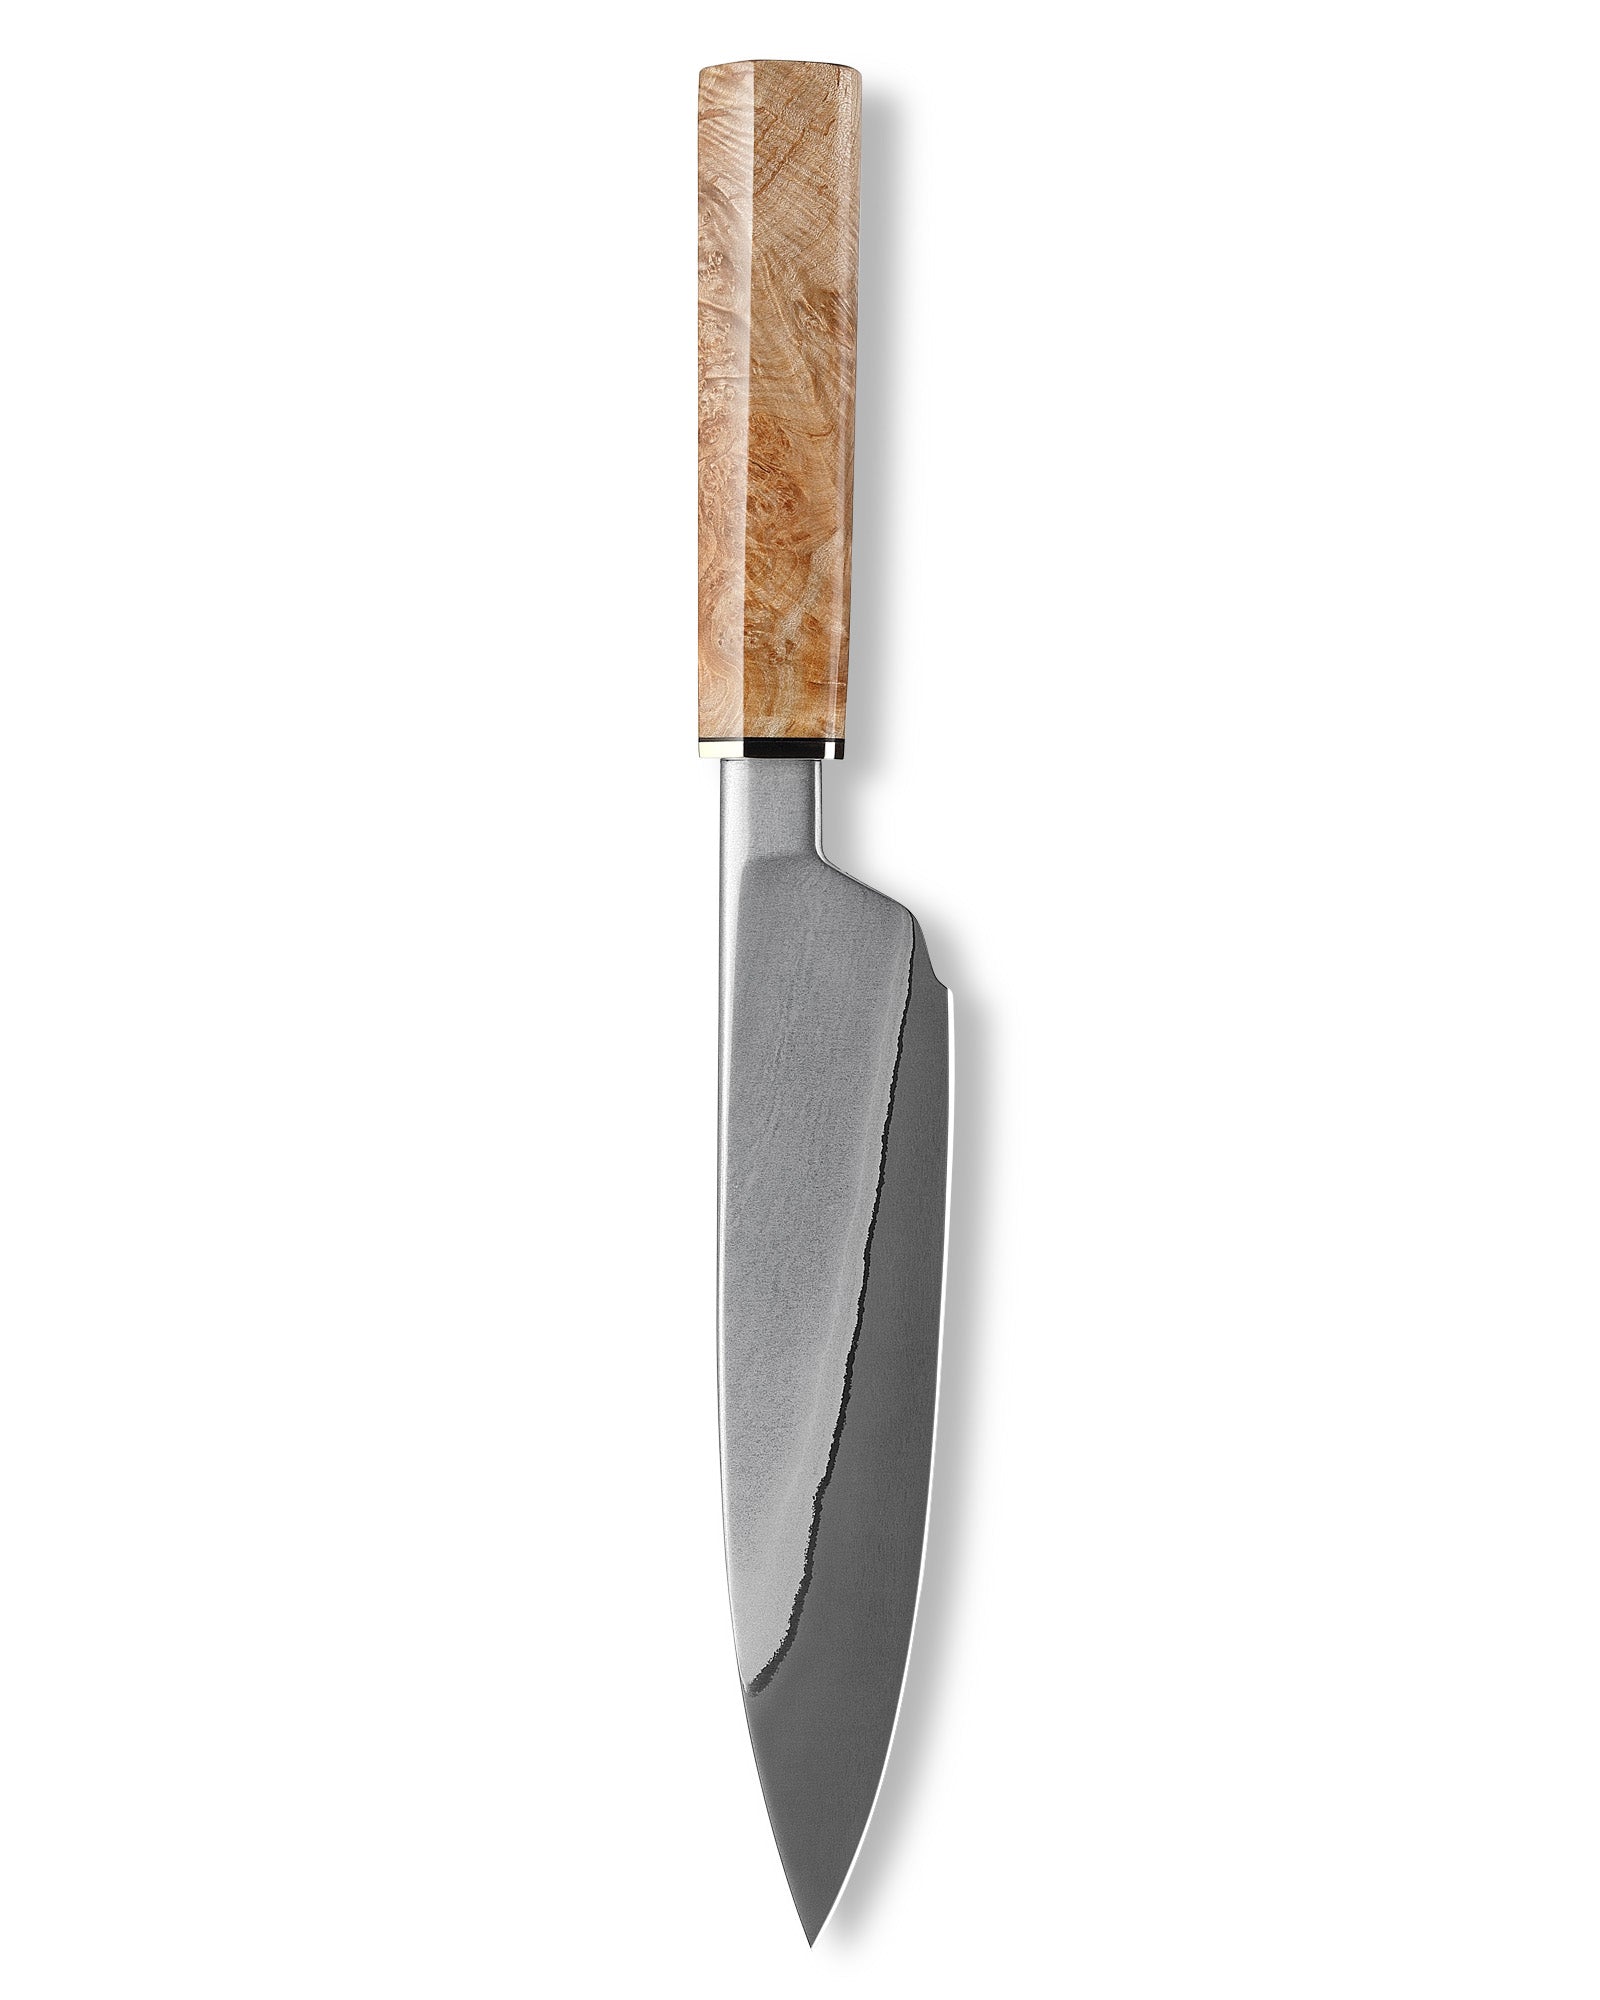 8” Chef Knife